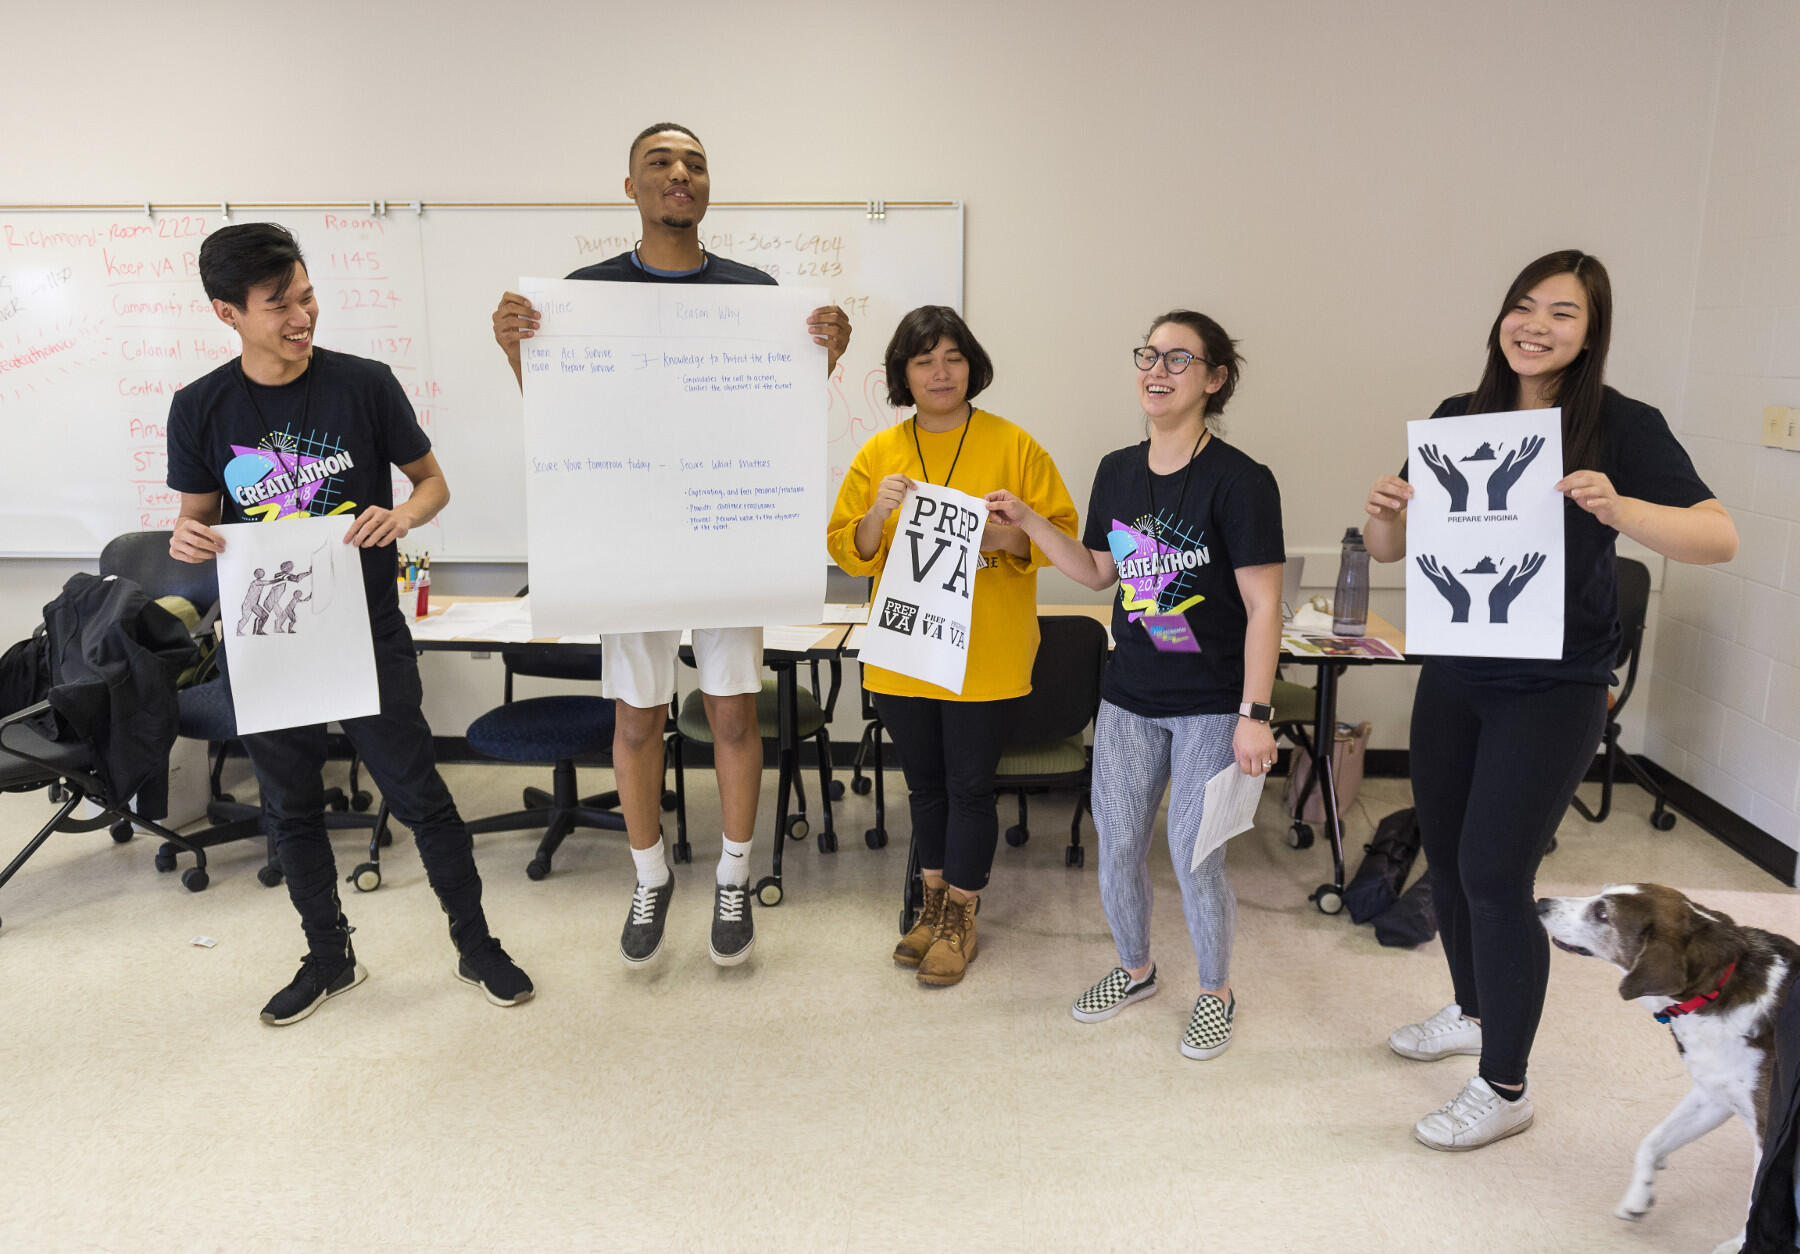 Throughout CreateAthon@VCU, teams stop work periodically to present their progress and get feedback. The final work is presented Friday morning to representatives from each nonprofit organization client.